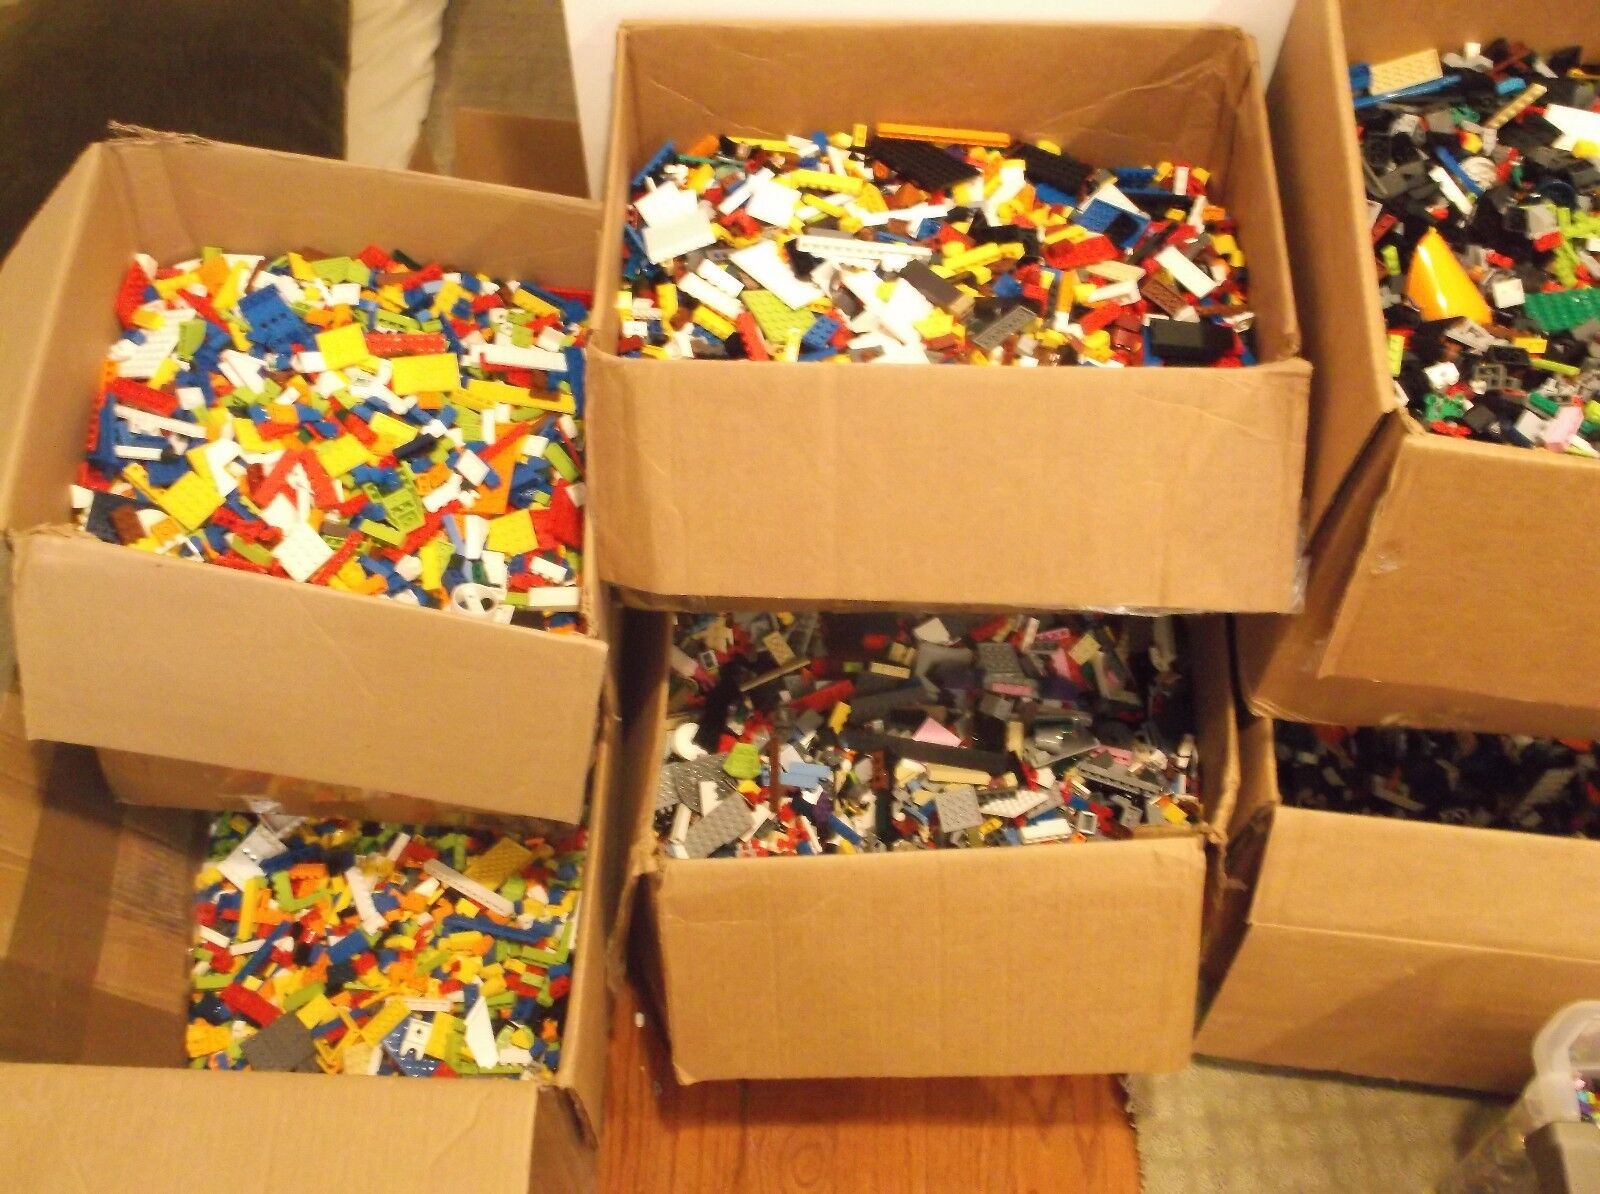 Clean 100% Genuine LEGO 5 LB Lots pounds Bulk Lot Cleaned Sanitized LEGO Does Not Apply